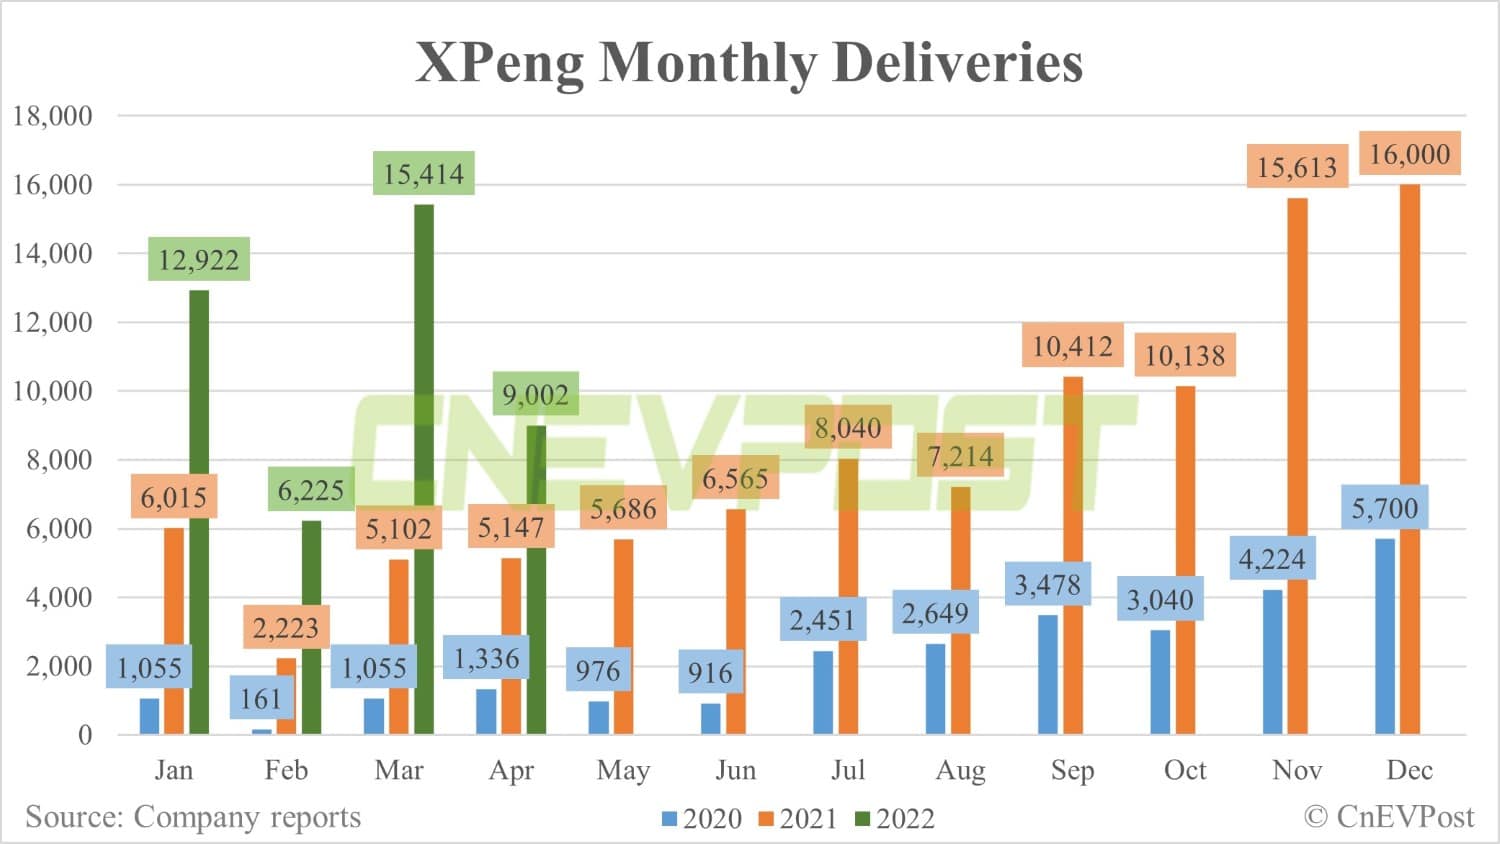 XPeng delivers 9,002 vehicles in April, down 42% from March-CnEVPost